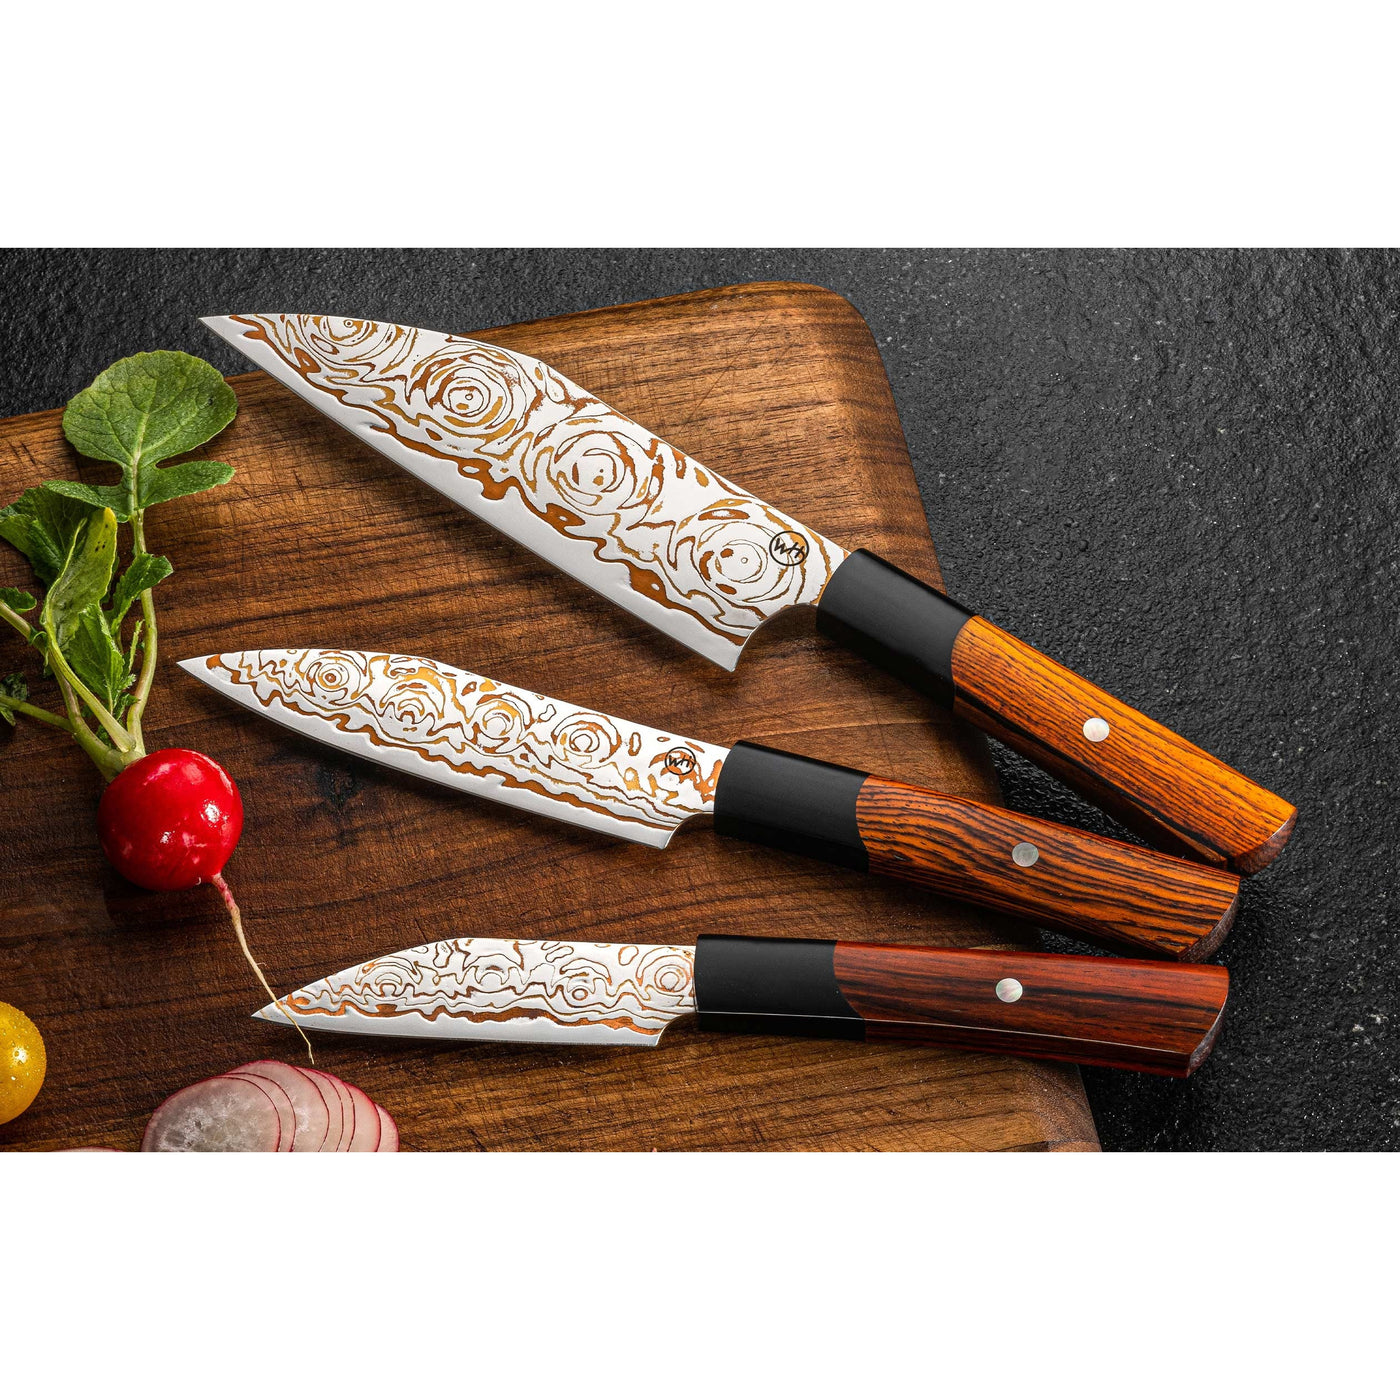 William Henry Kultro Flare Knife Set-Knives & Tools-Kevin's Fine Outdoor Gear & Apparel